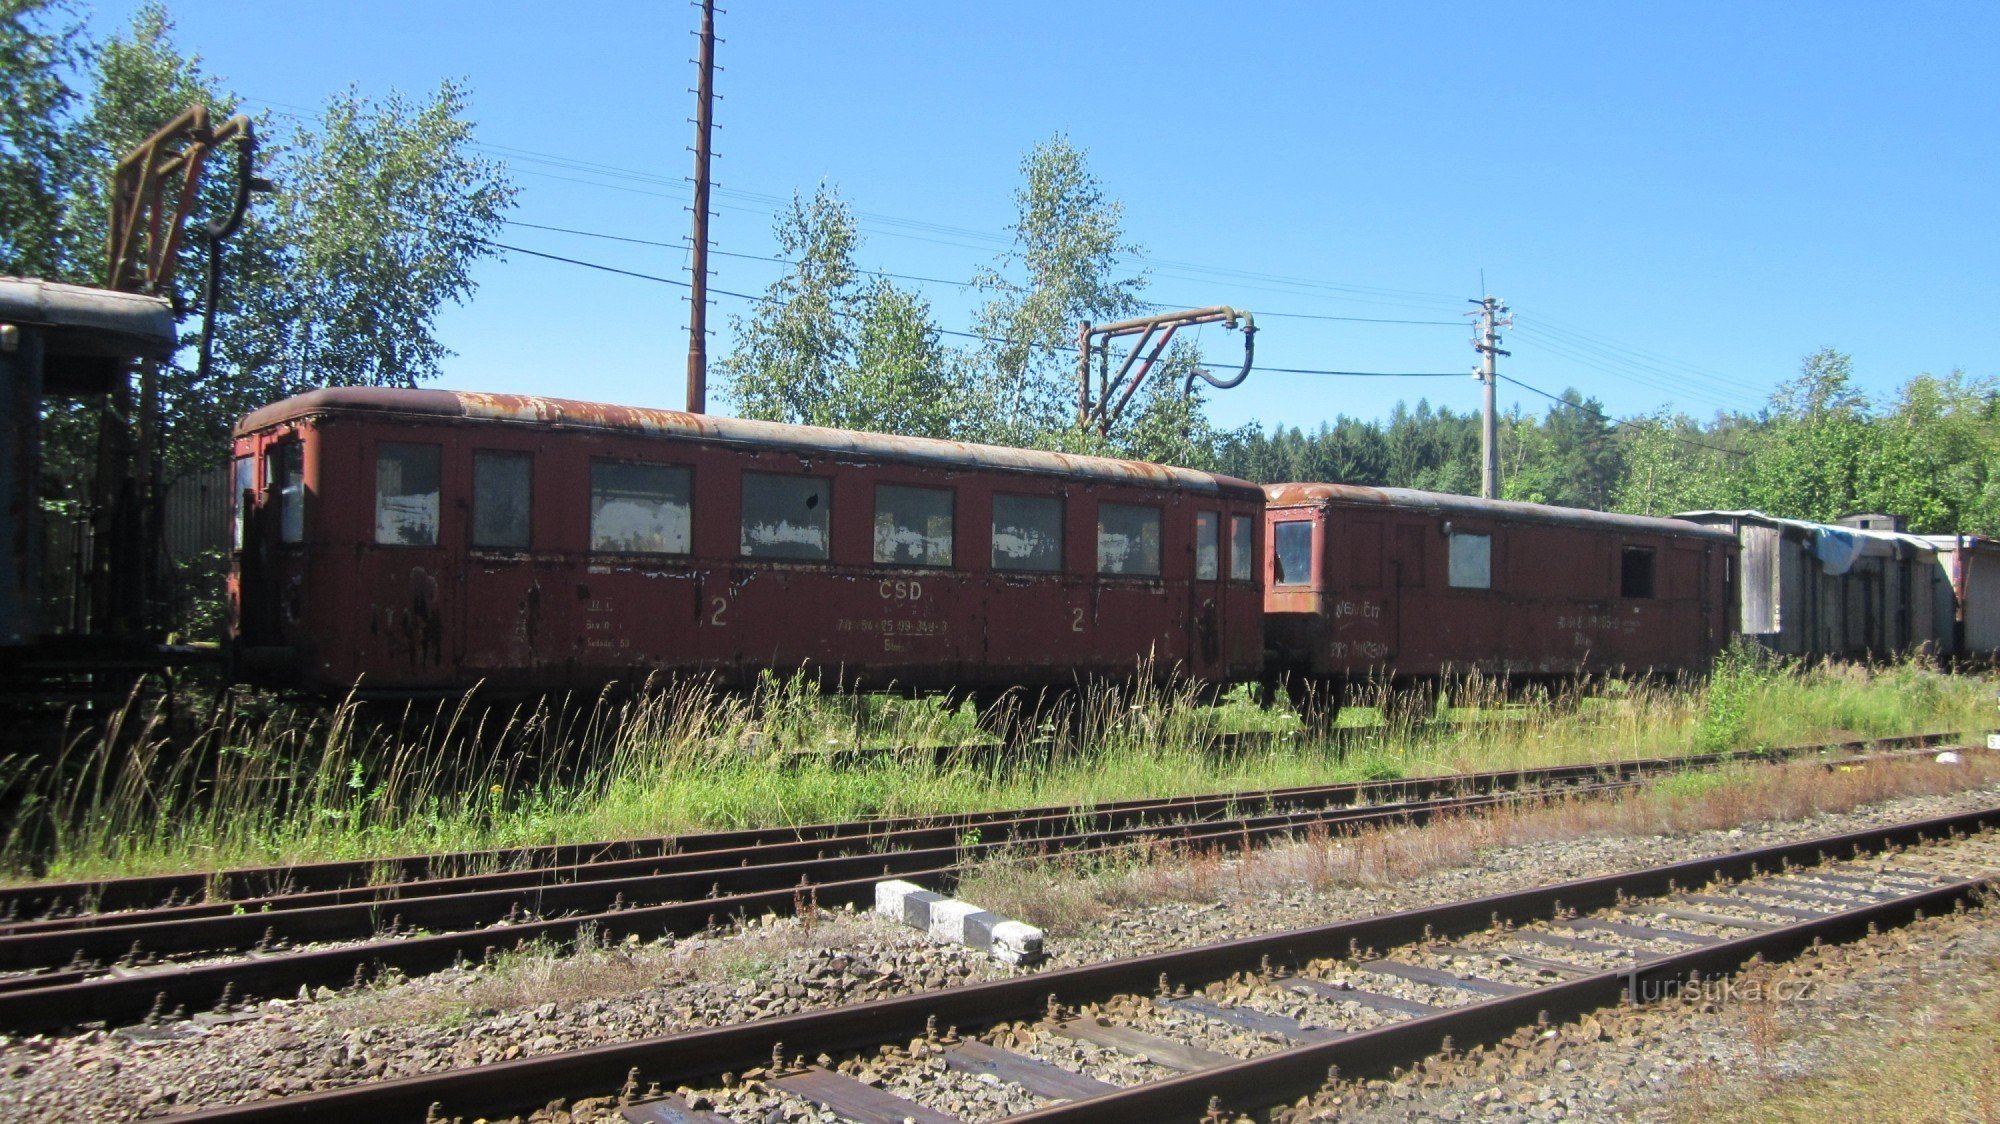 Parked wagons at the railway station in Domašín